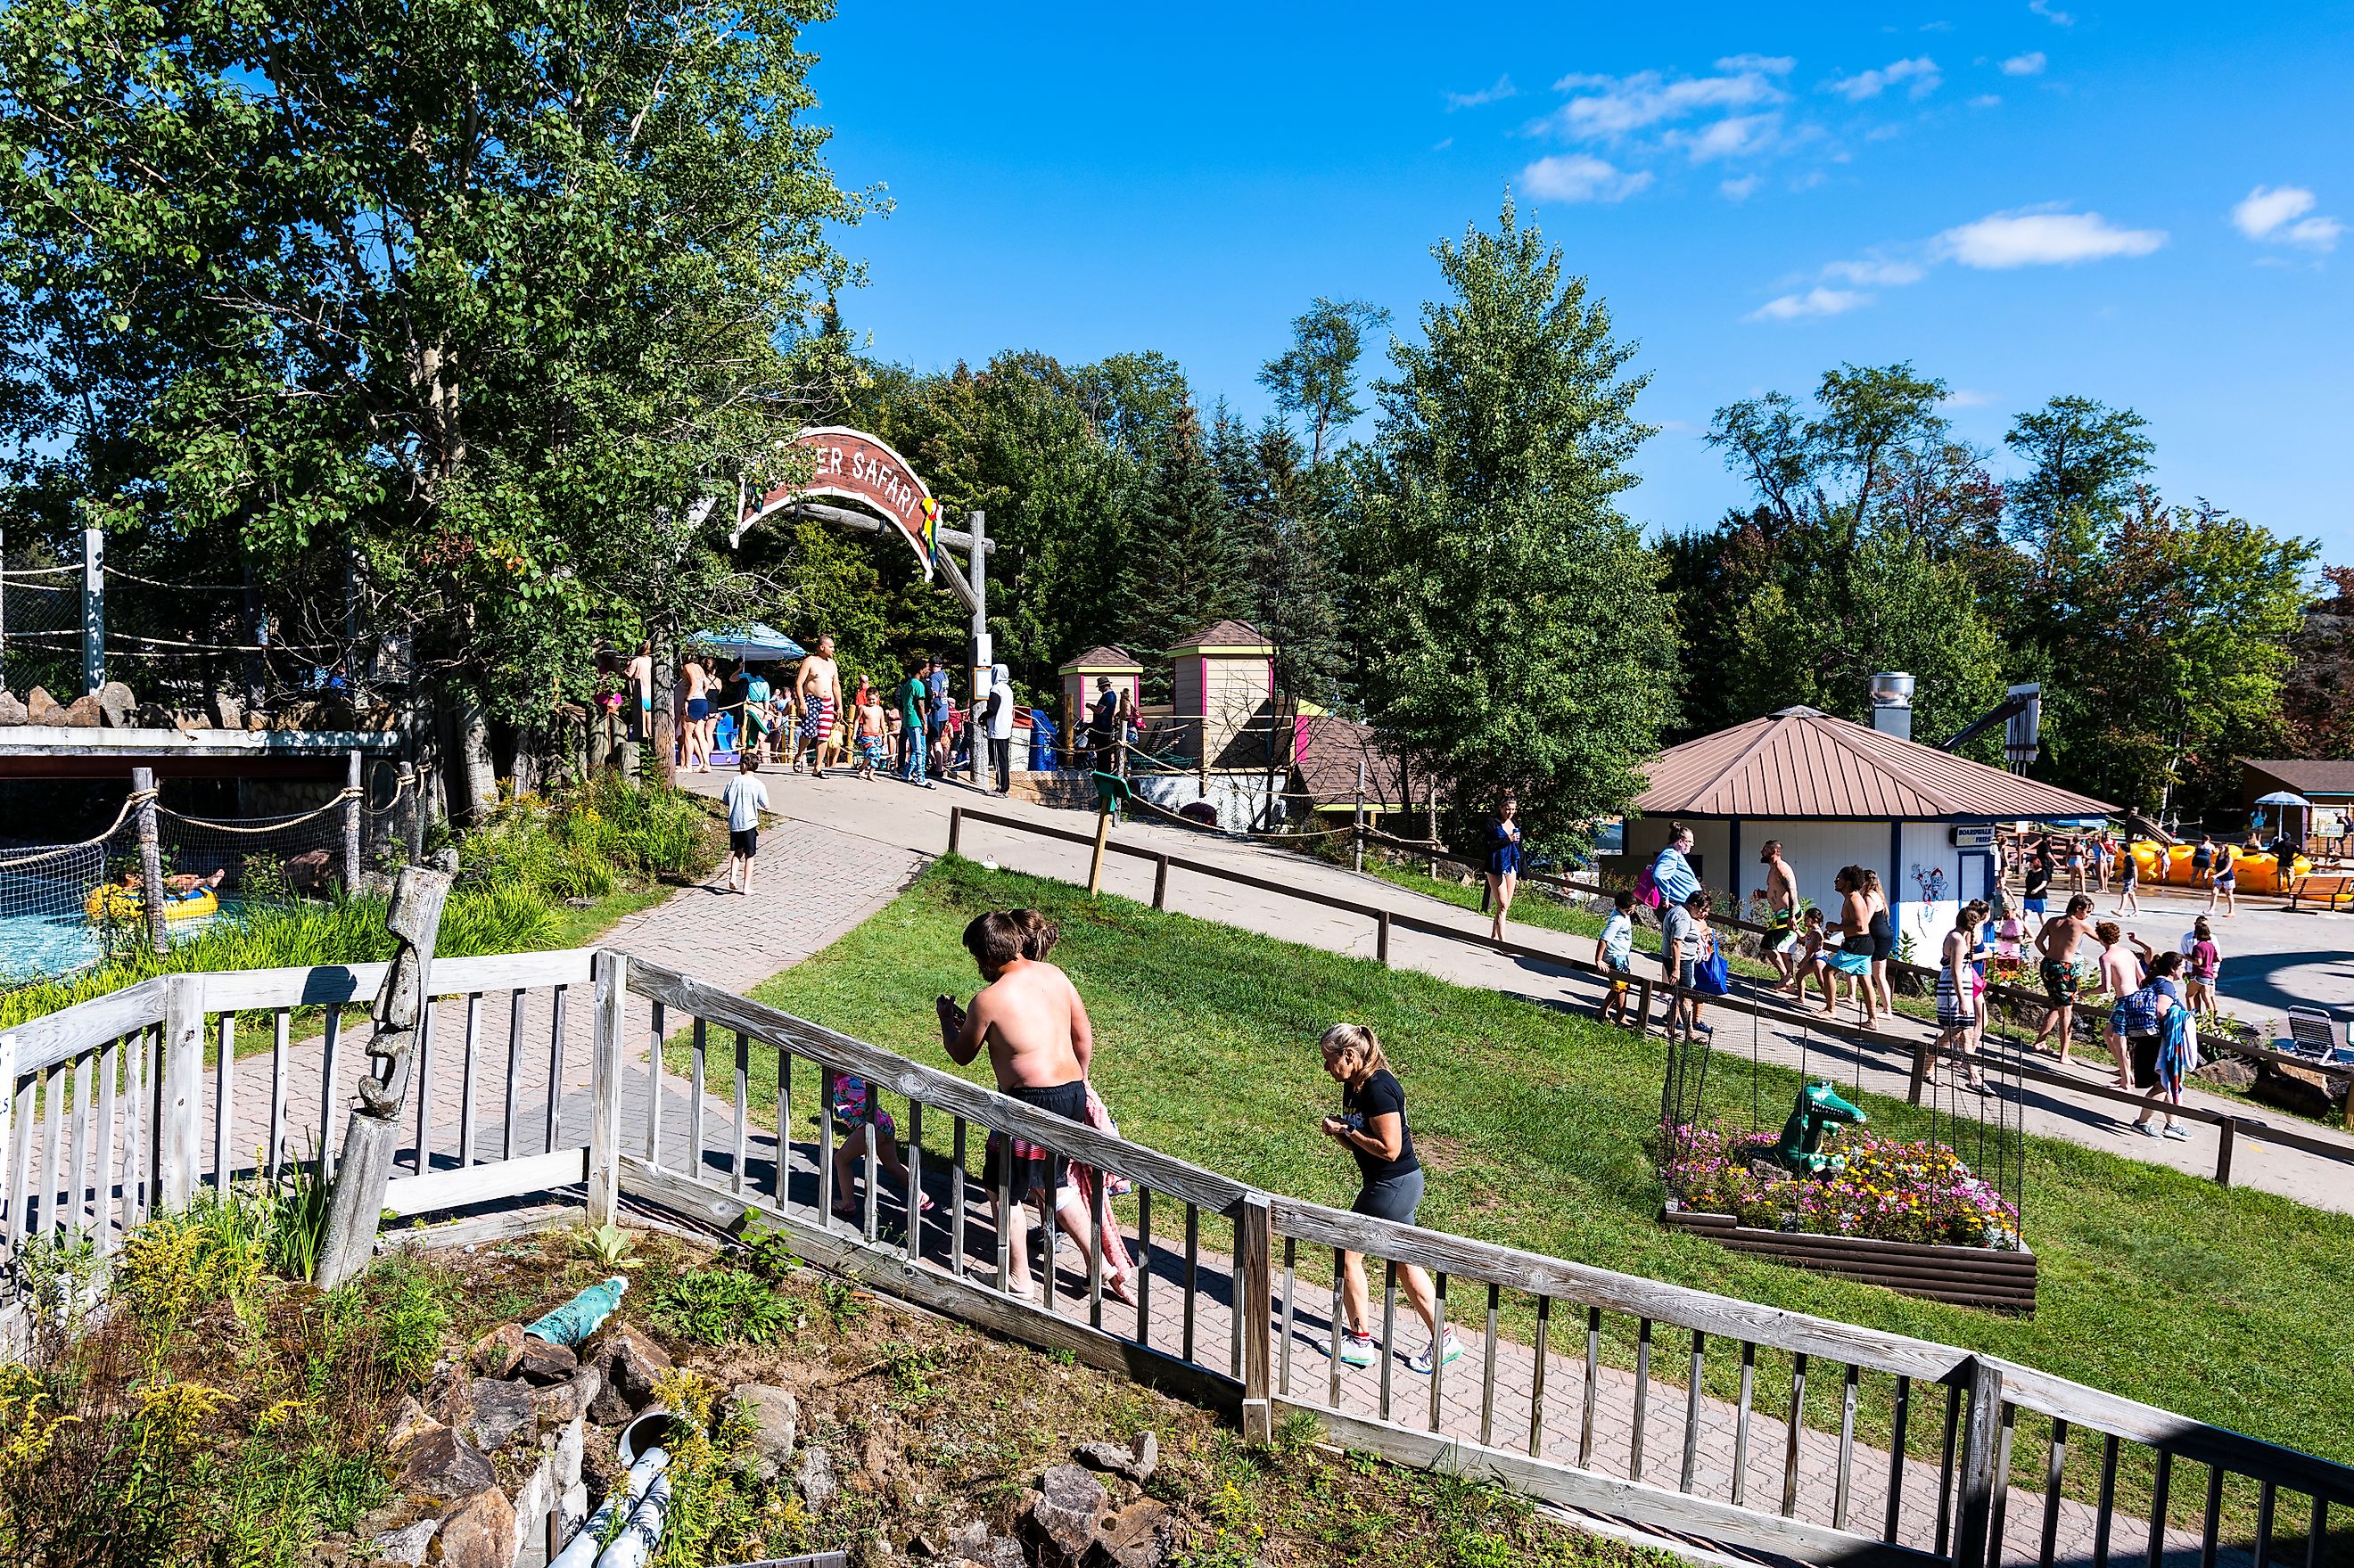 People having a good time at aÂ  water park in Old Forge, New York.